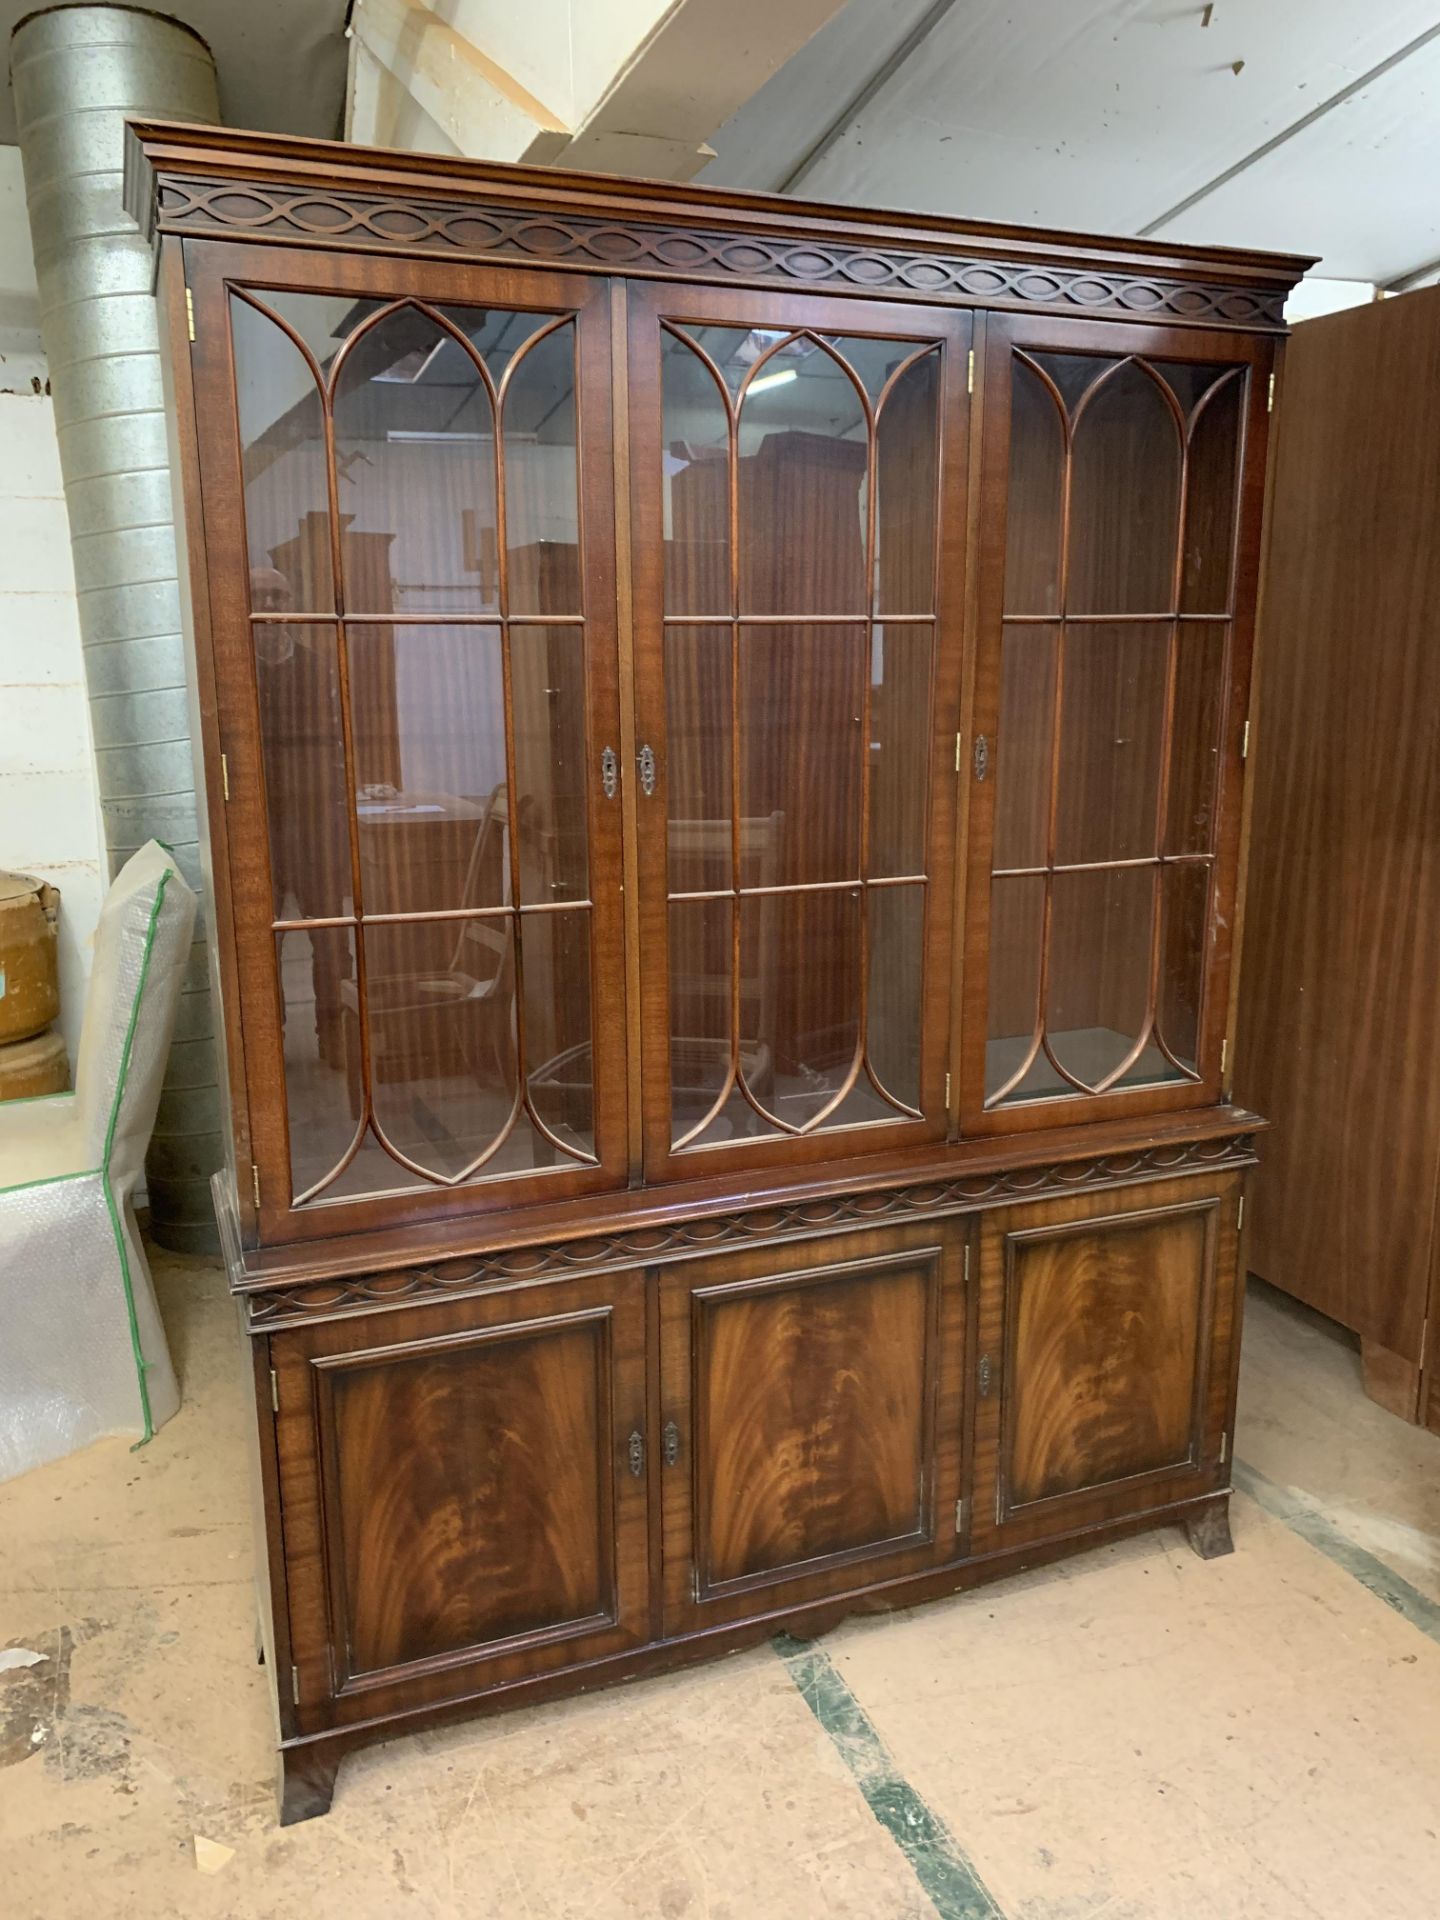 Three-door glazed Bookcase or Display Cabinet, width approx 5'.